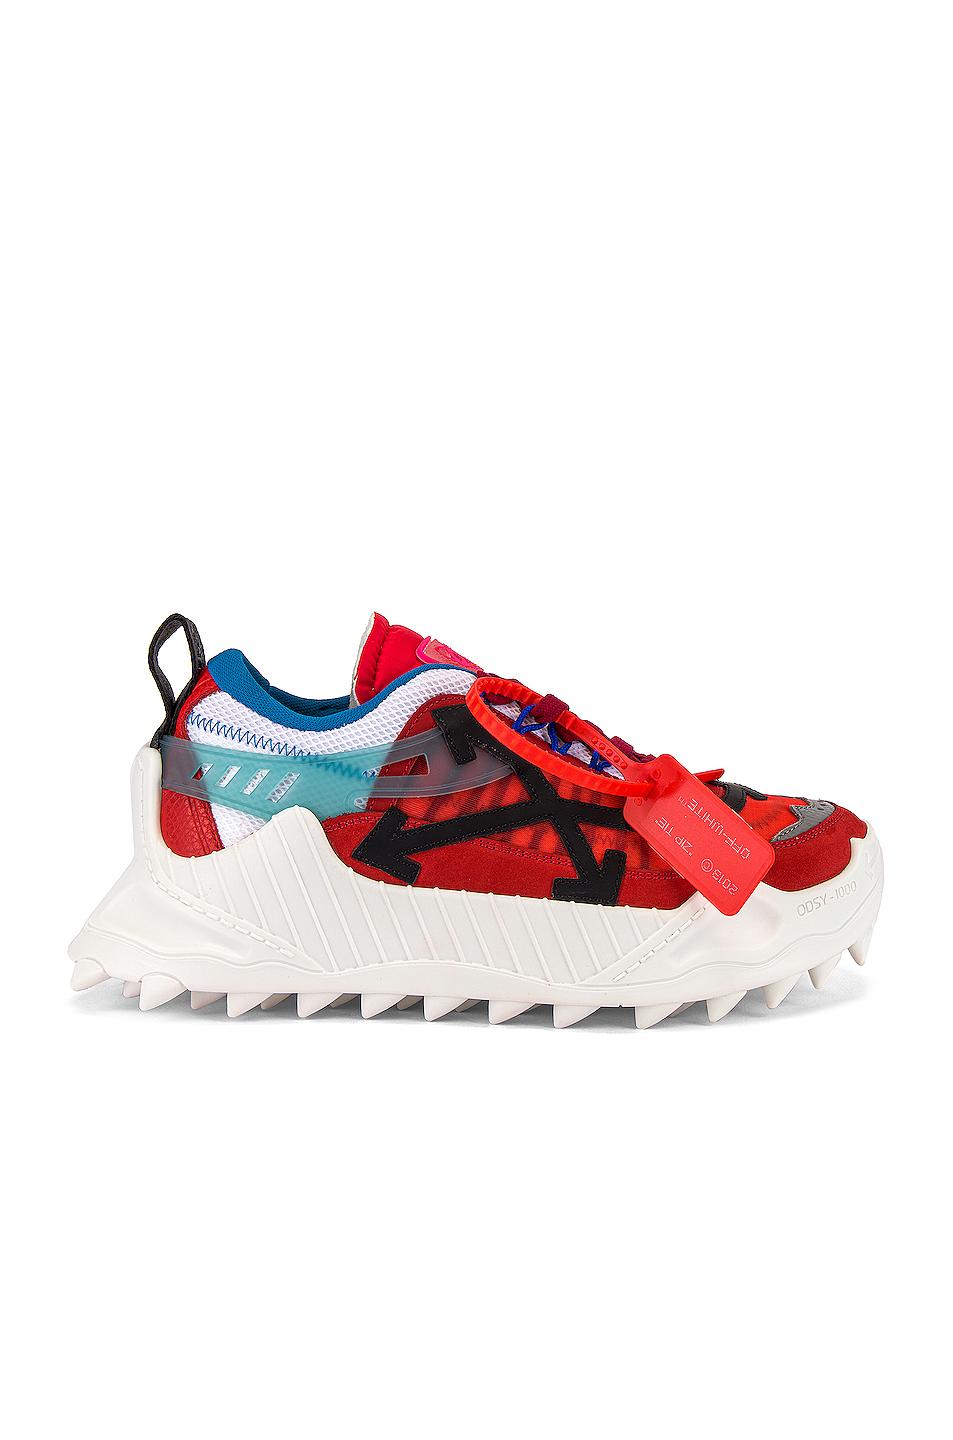 Off White C O Virgil Abloh Odsy 1000 Sneakers In Red Black Red For Men Save 58 Lyst